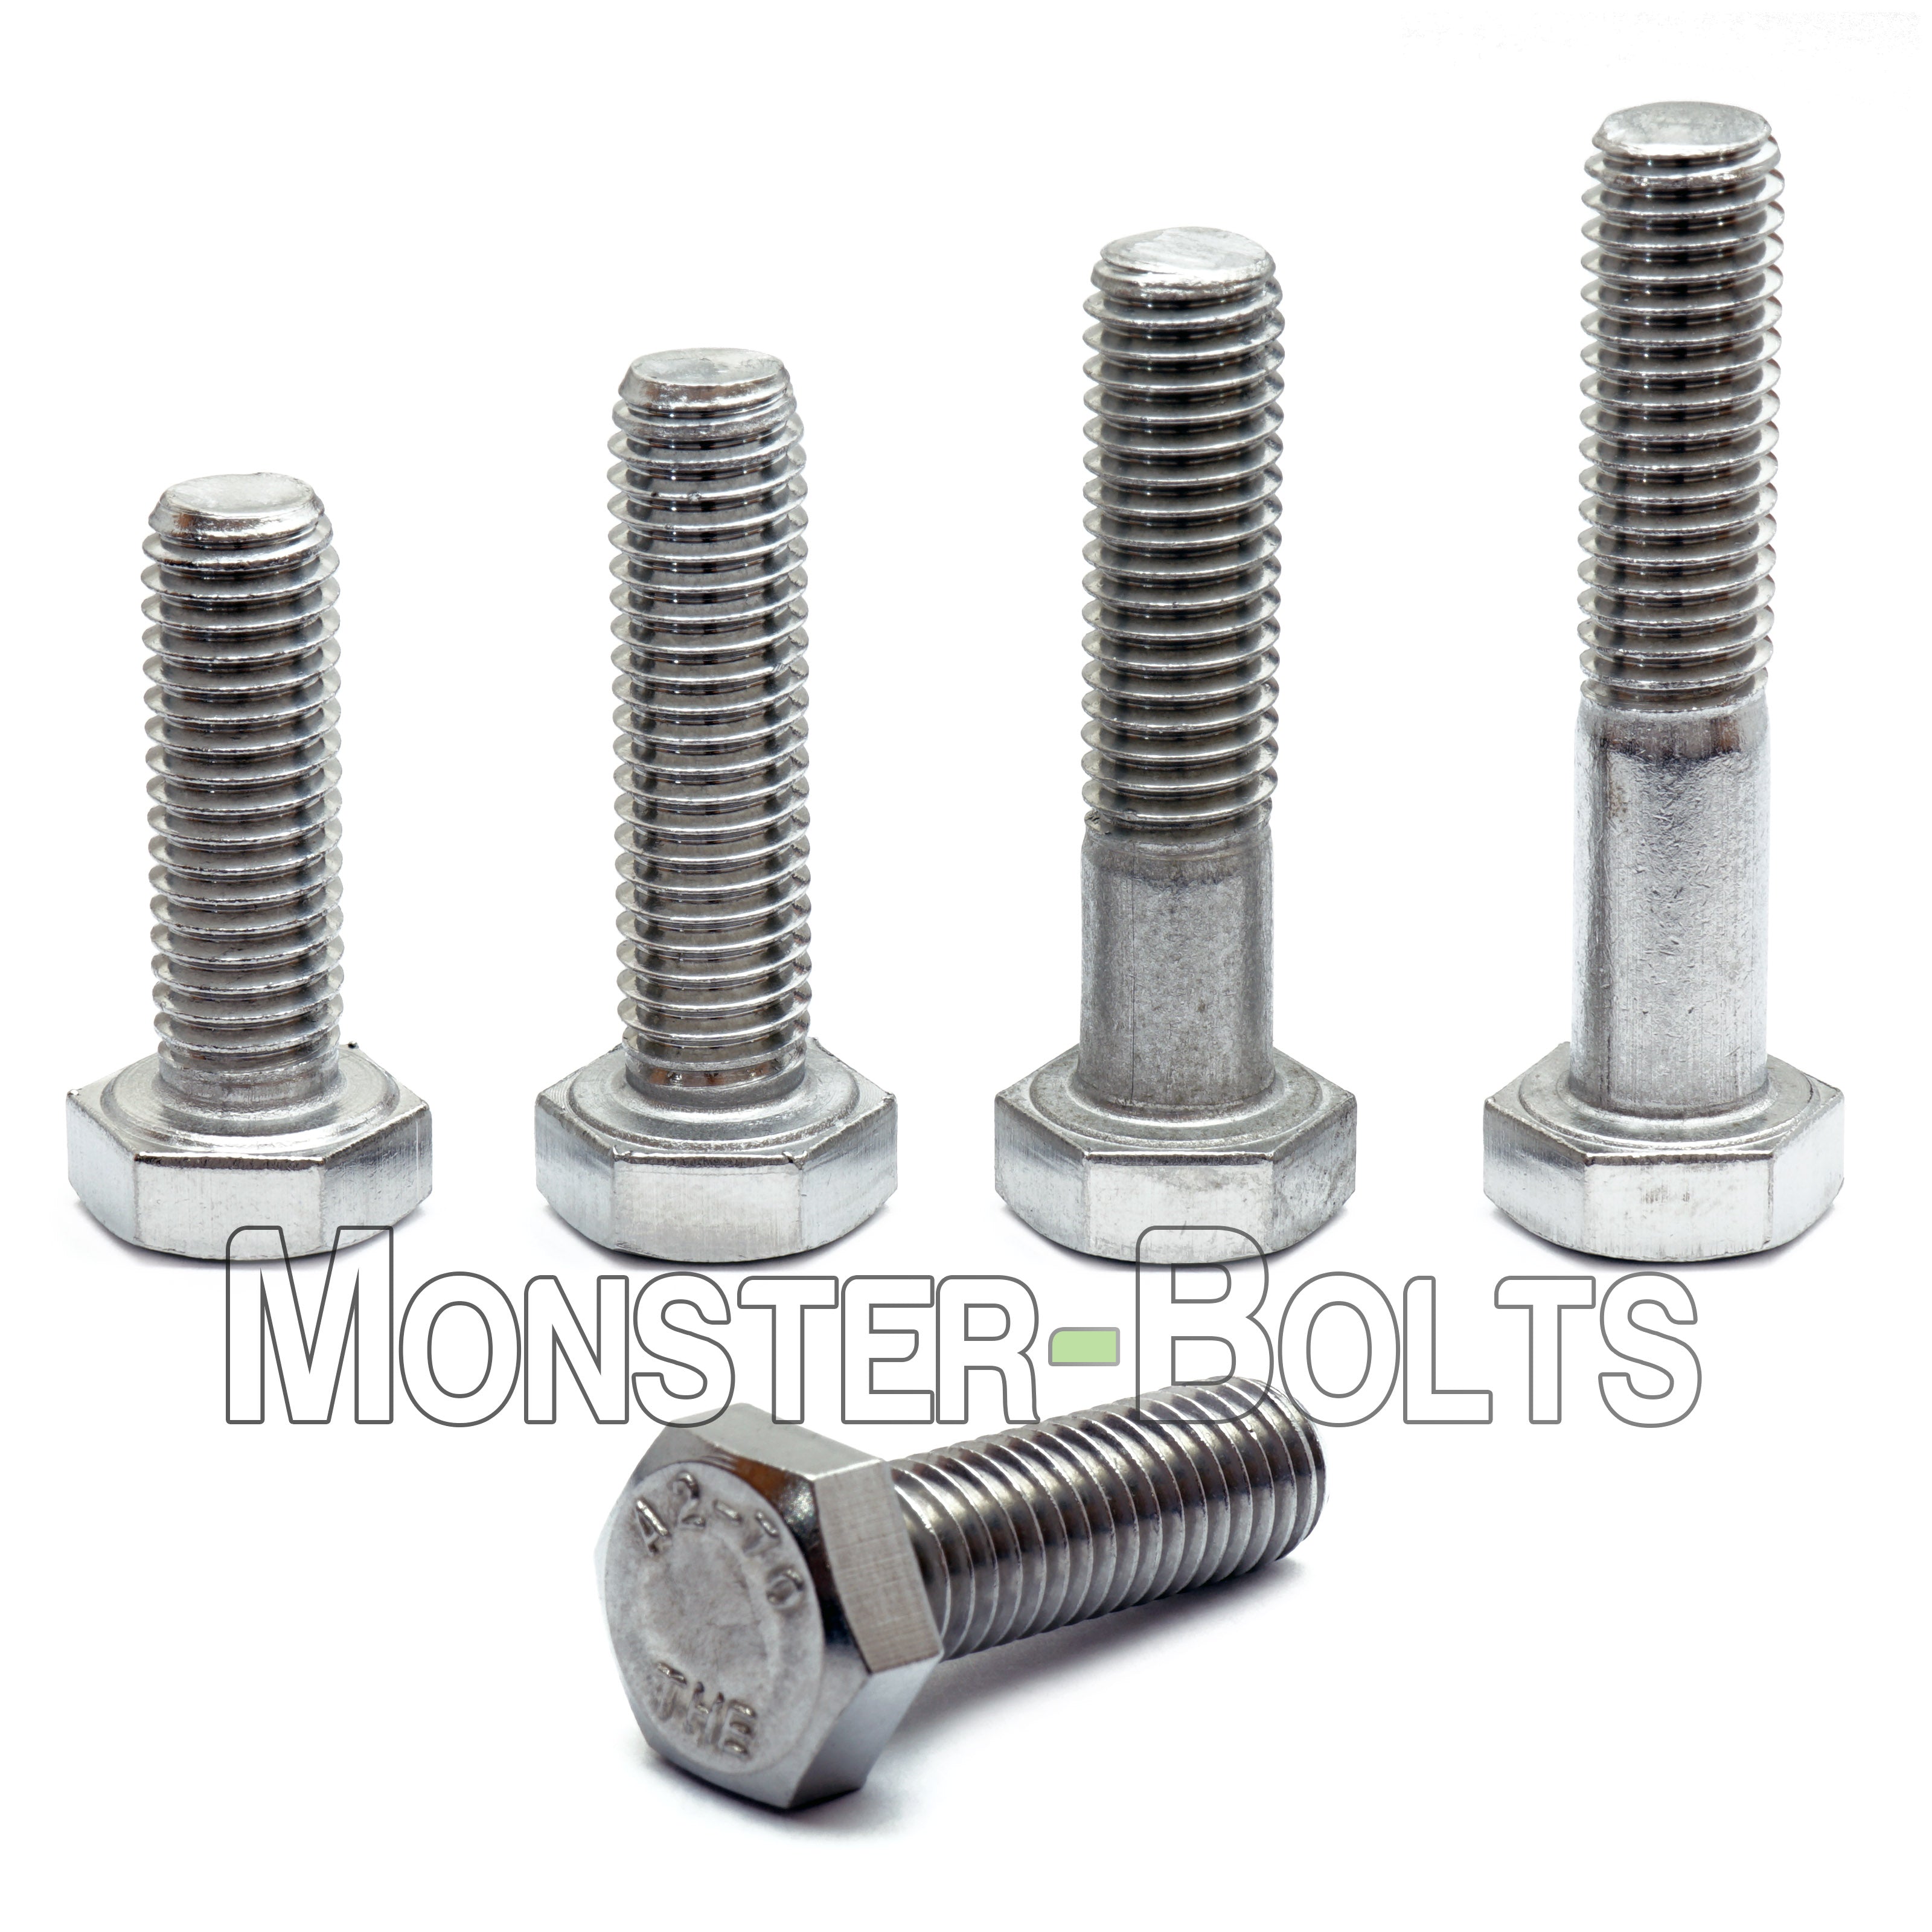 6mm M6 x 45mm HEX SET SCREW DIN 933 FULLY THREADED BOLT A2 STAINLESS STEEL 